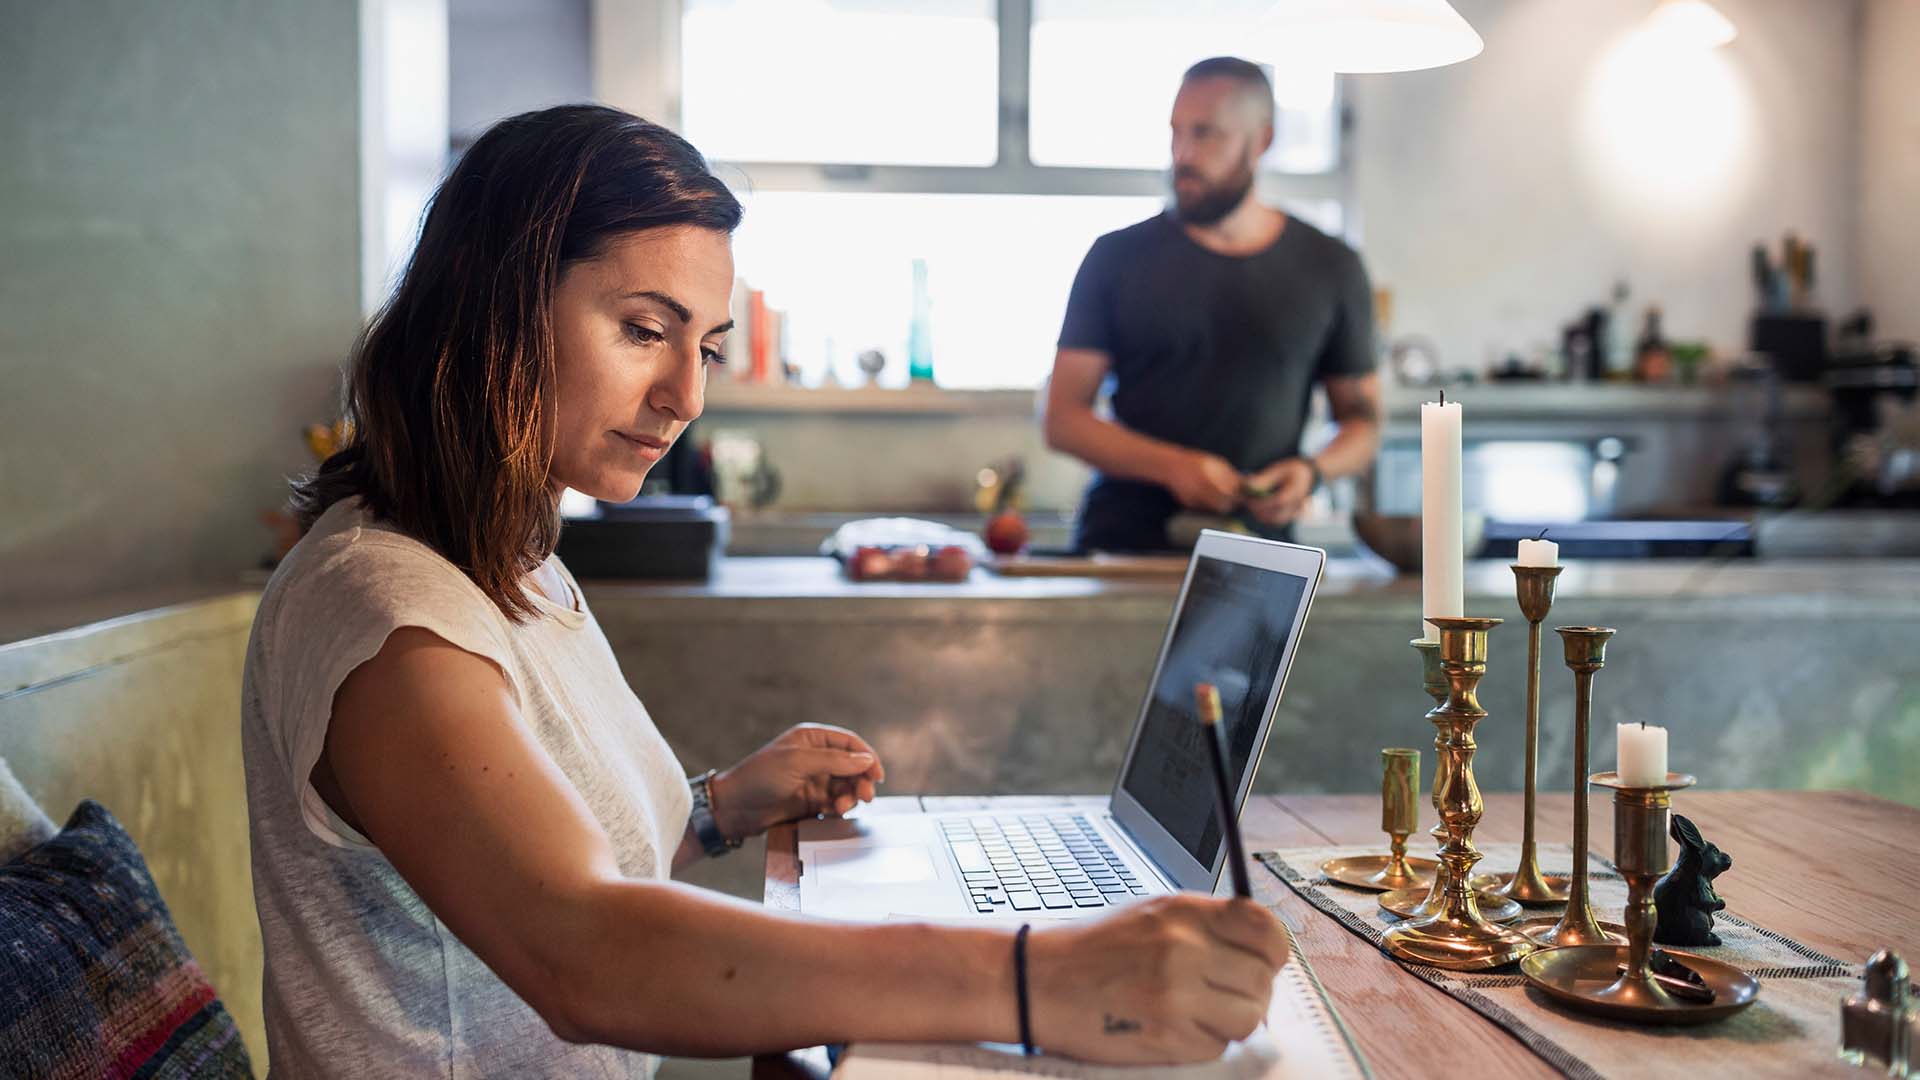 Woman works at home desk with man behind her